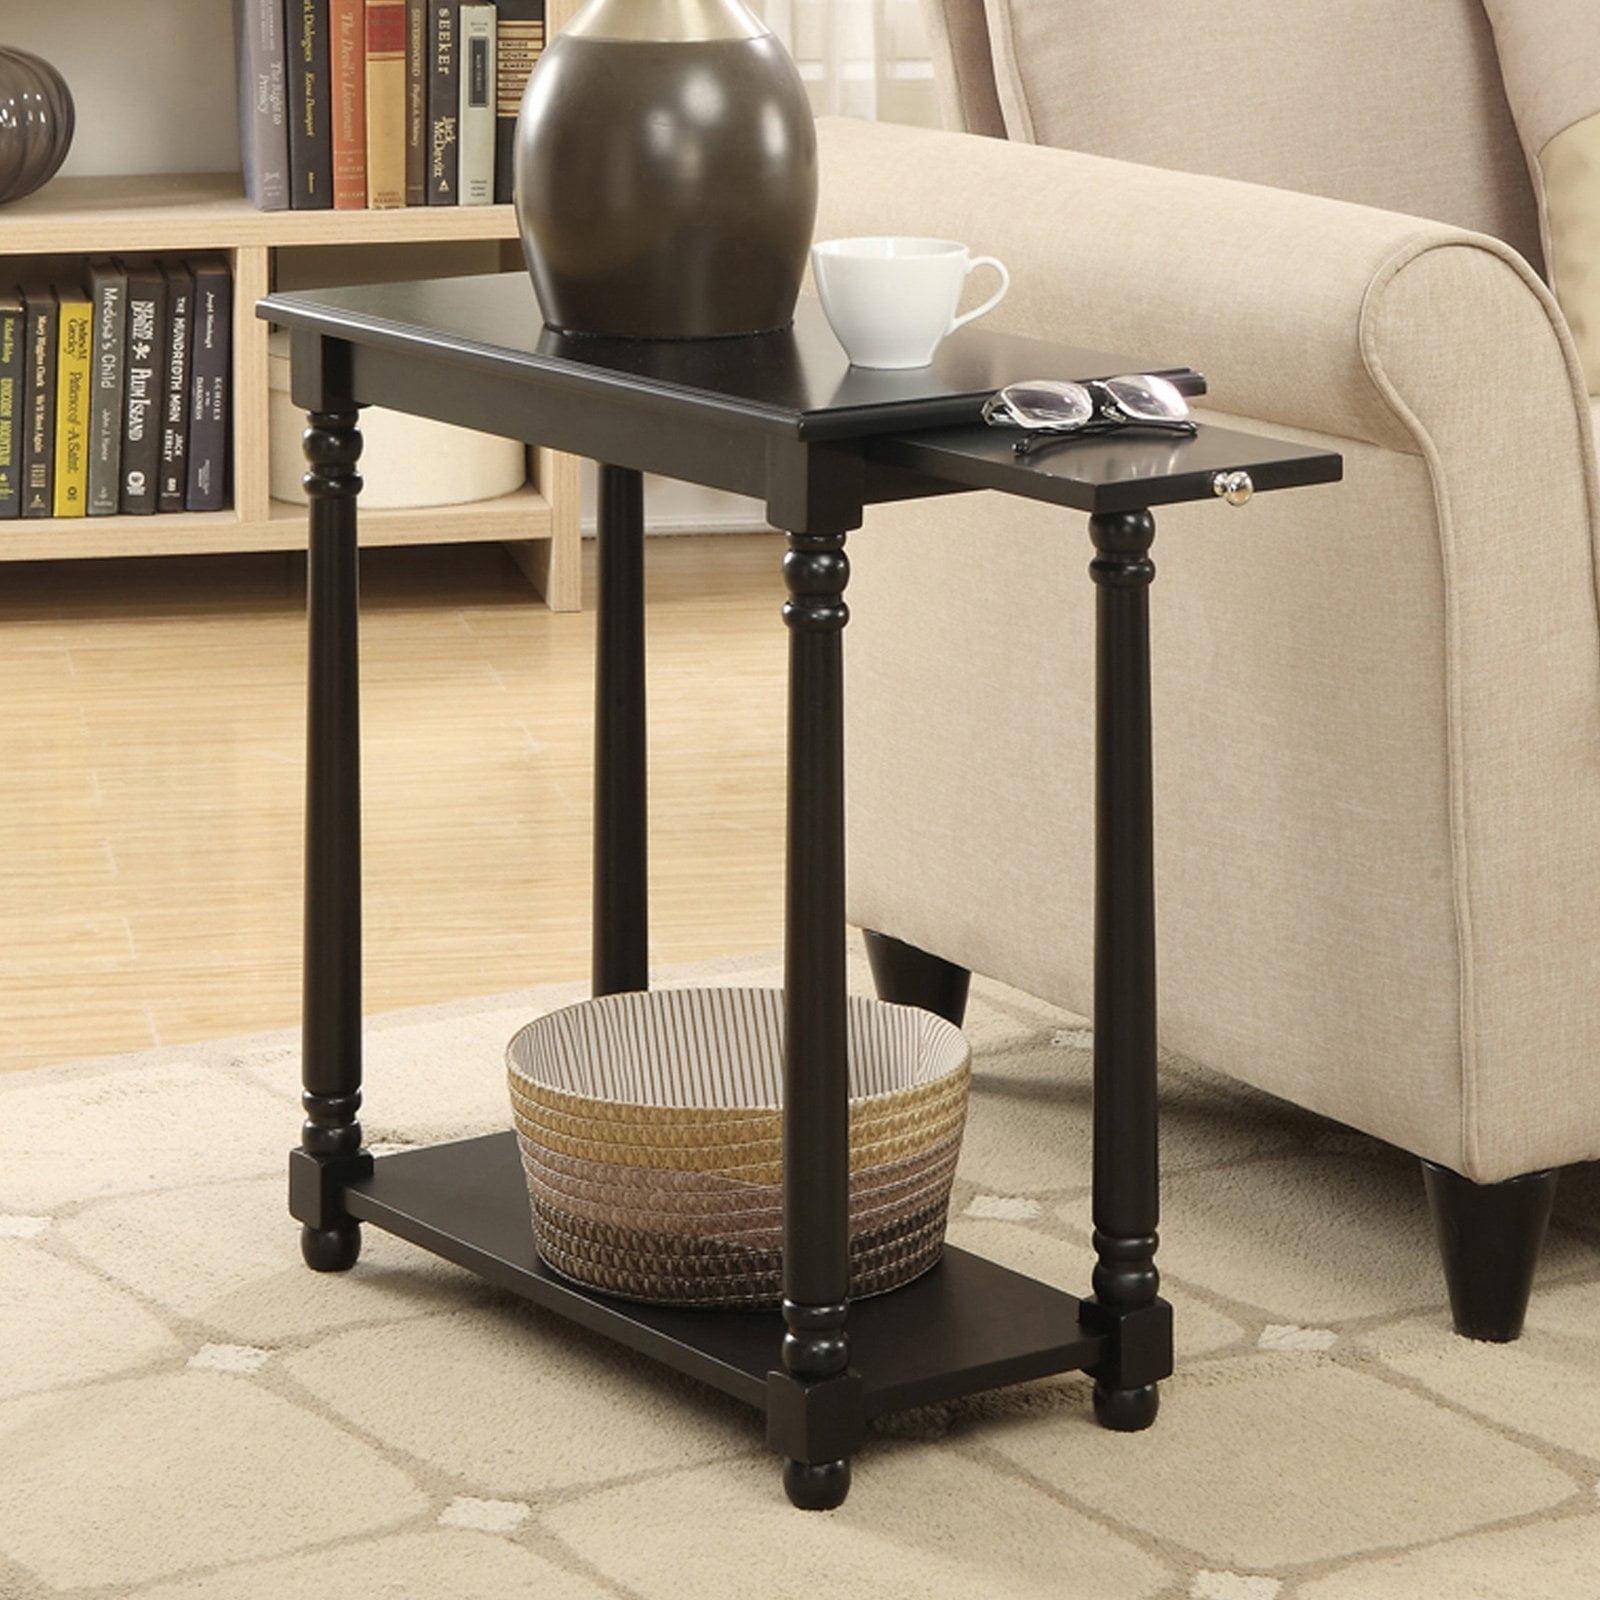 Provence Elegance Black Wooden End Table with Spindle Legs